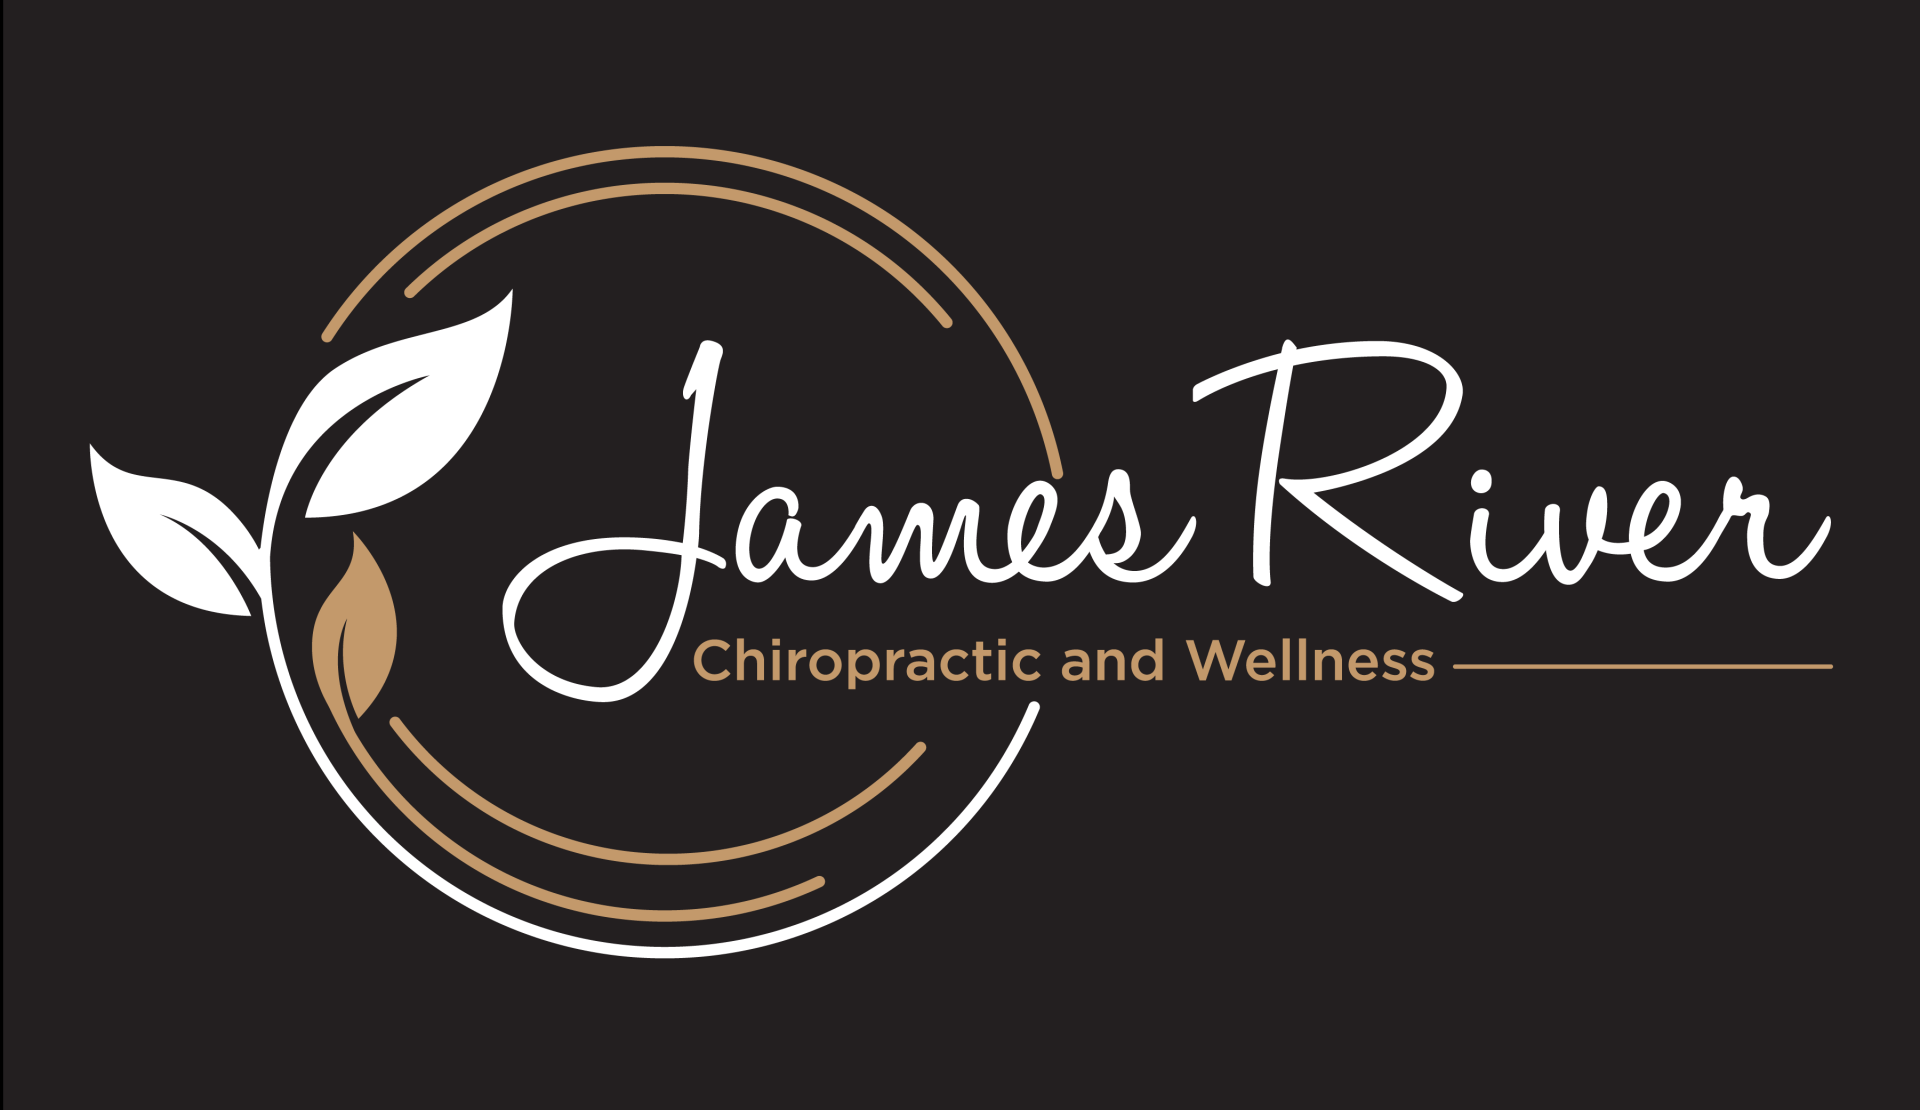 James River Chiropractic and Wellness